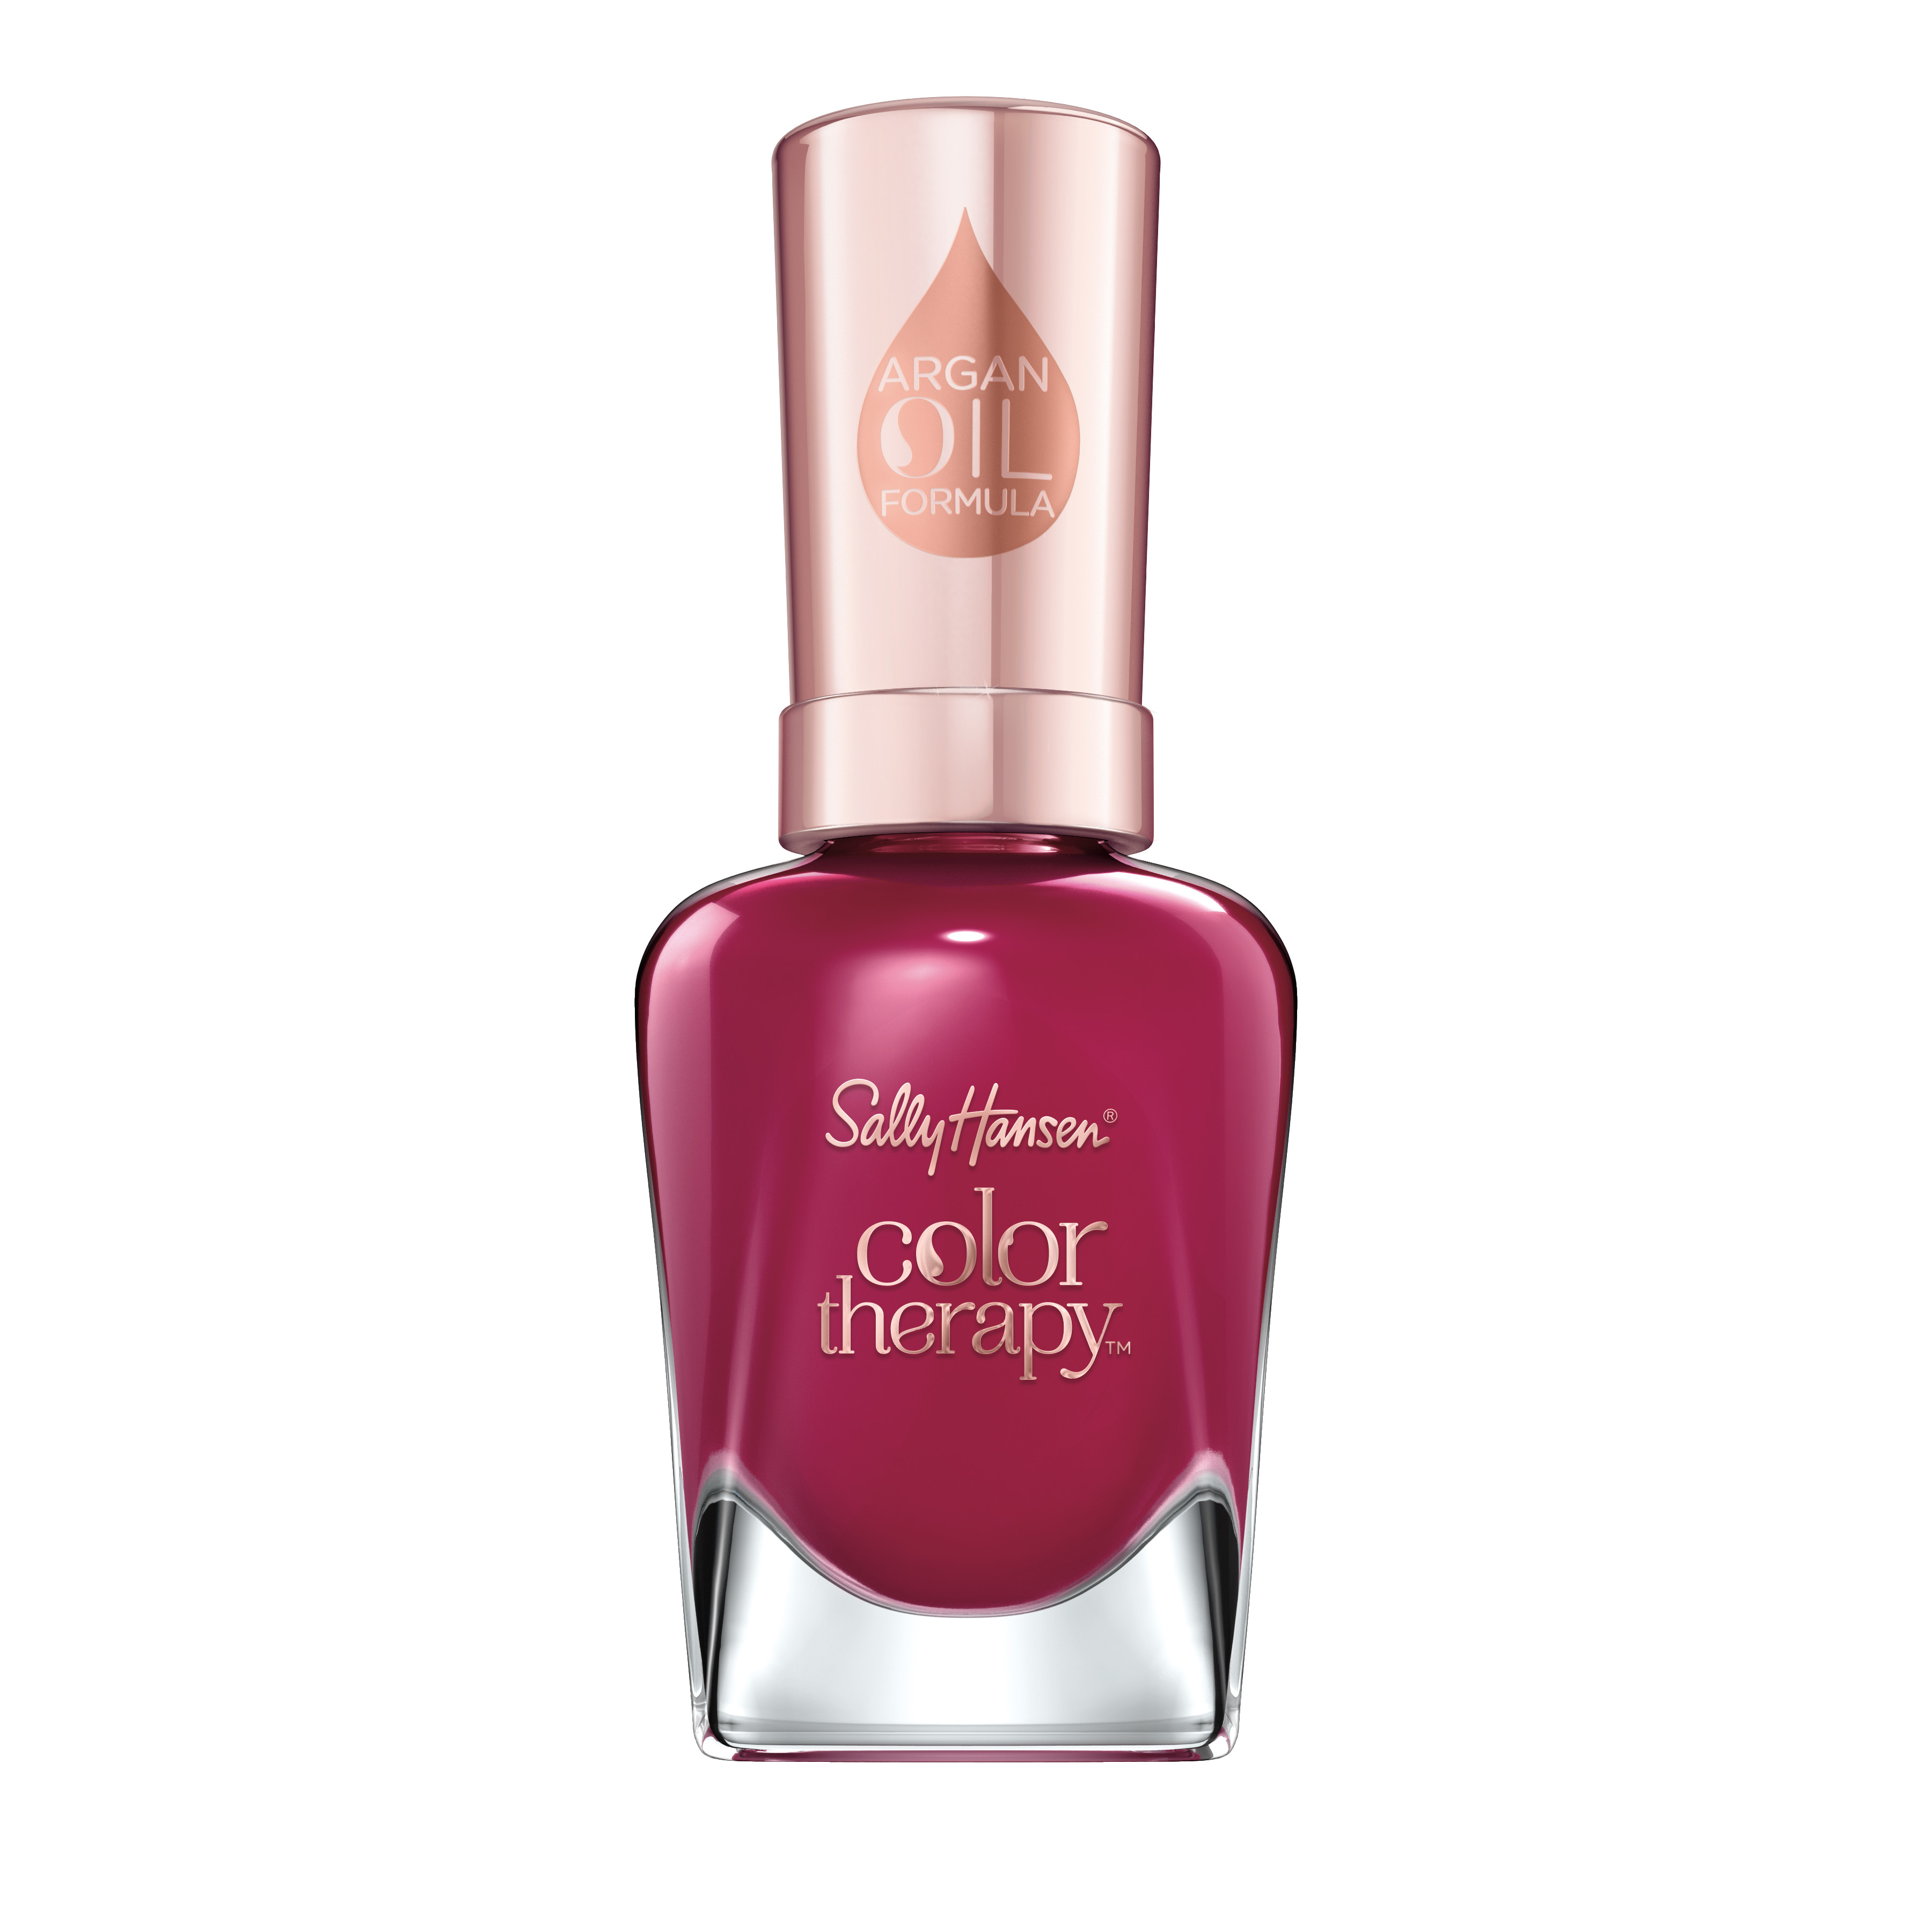 Sally Hansen Color Therapy Nail Color, Ohm My Magenta, 0.5 oz, Color Nail Polish, Nail Polish, Nail Polish Colors, Restorative, Argan Oil Formula, Instantly Moisturizes - image 1 of 3